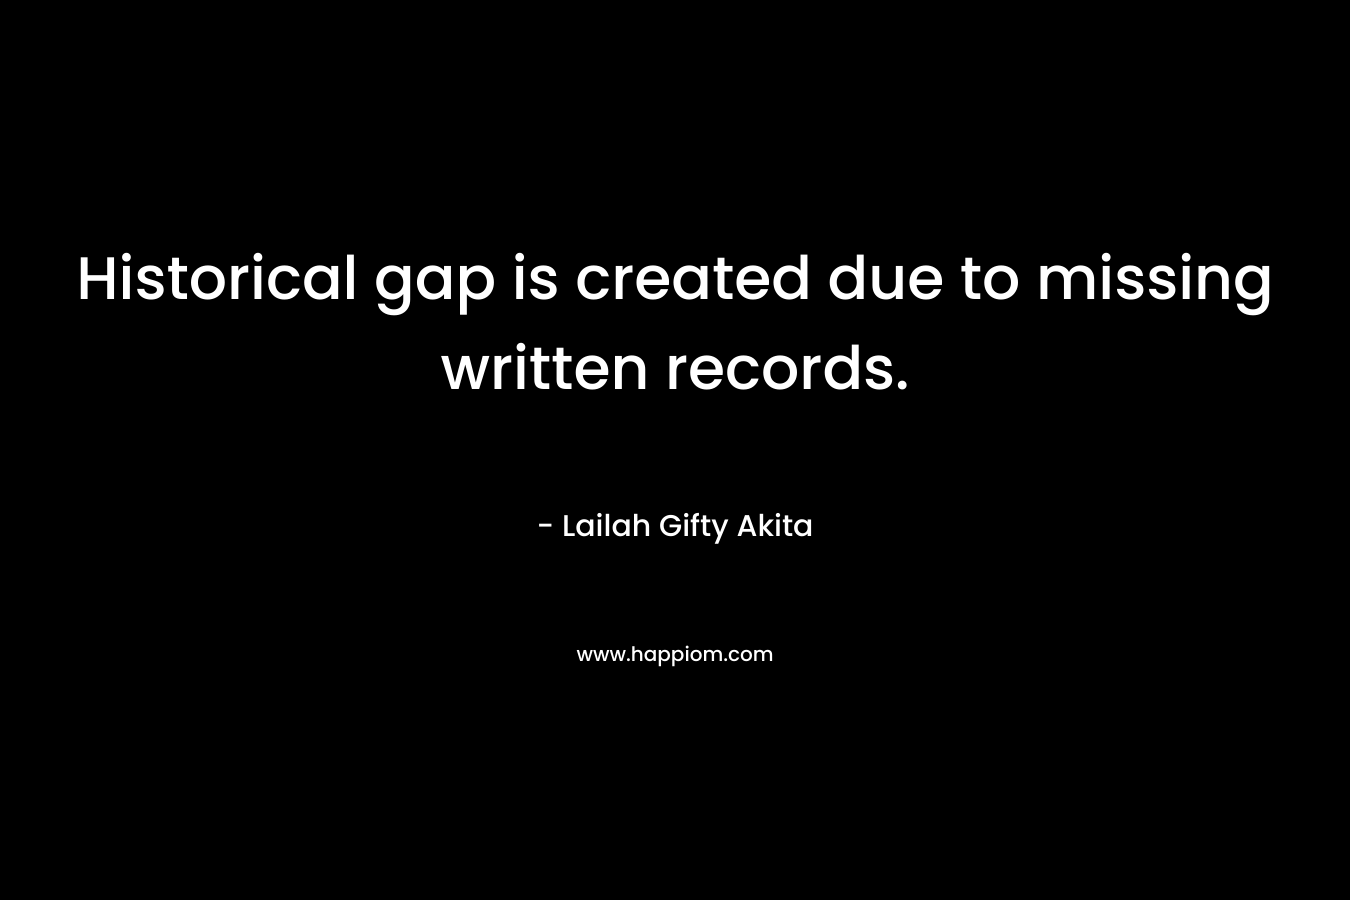 Historical gap is created due to missing written records.